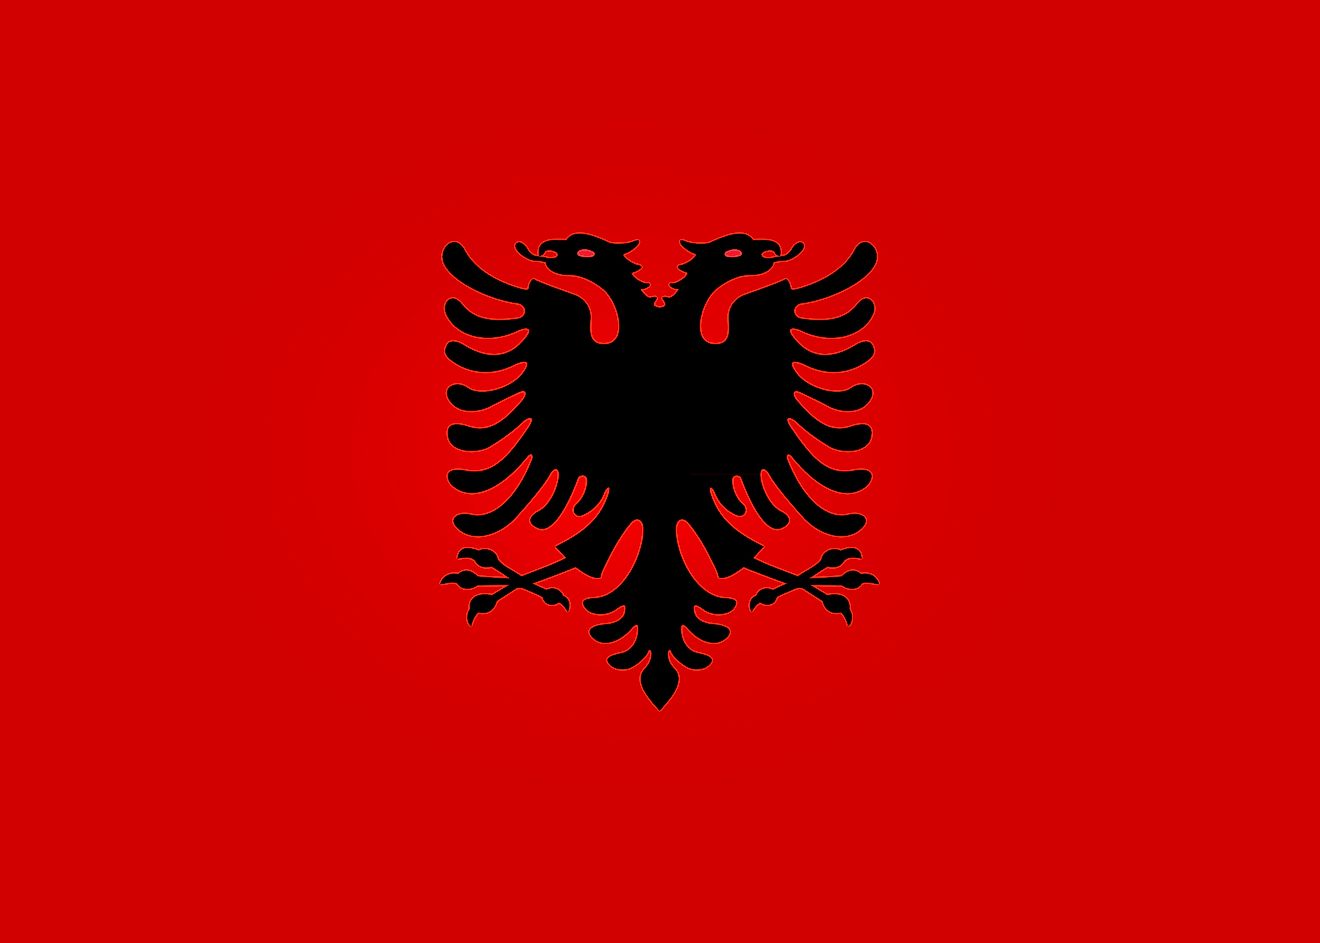 The National Flag of Albania - Flamuri Kombëtar  features a red background with a double-headed eagle placed in the center.